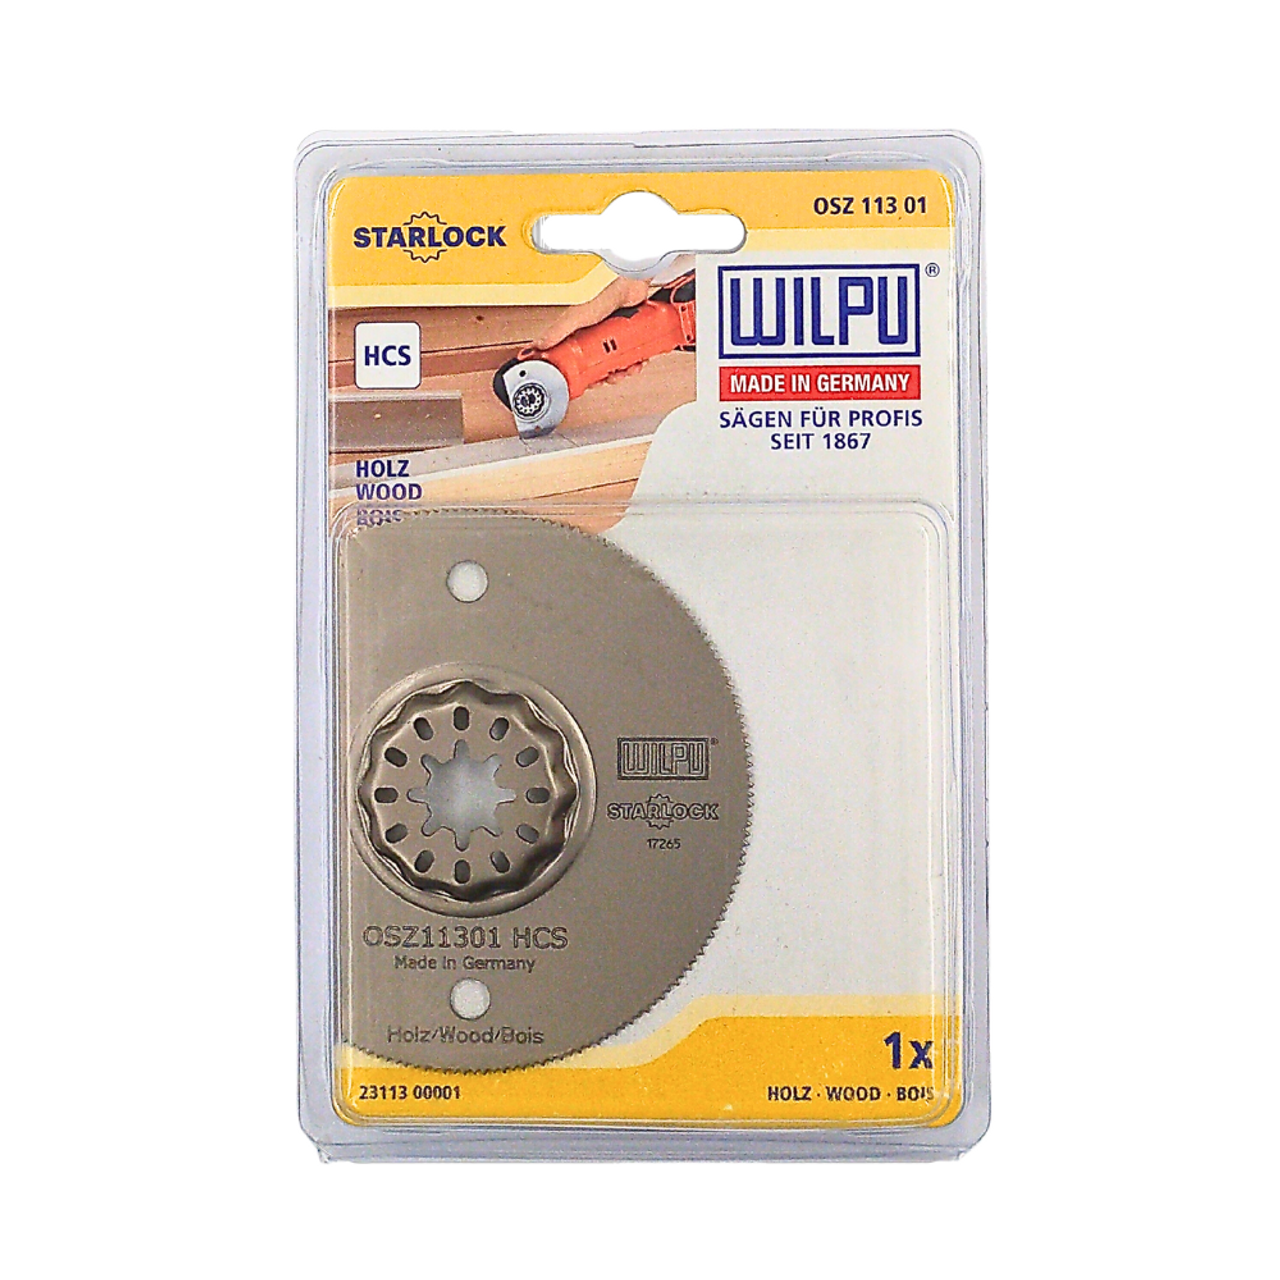 WILPU Multi Tool Blade for Timber, Plastics in corners, the OSZ 113 Saw Blade is for Semi Circular for Solid Timber